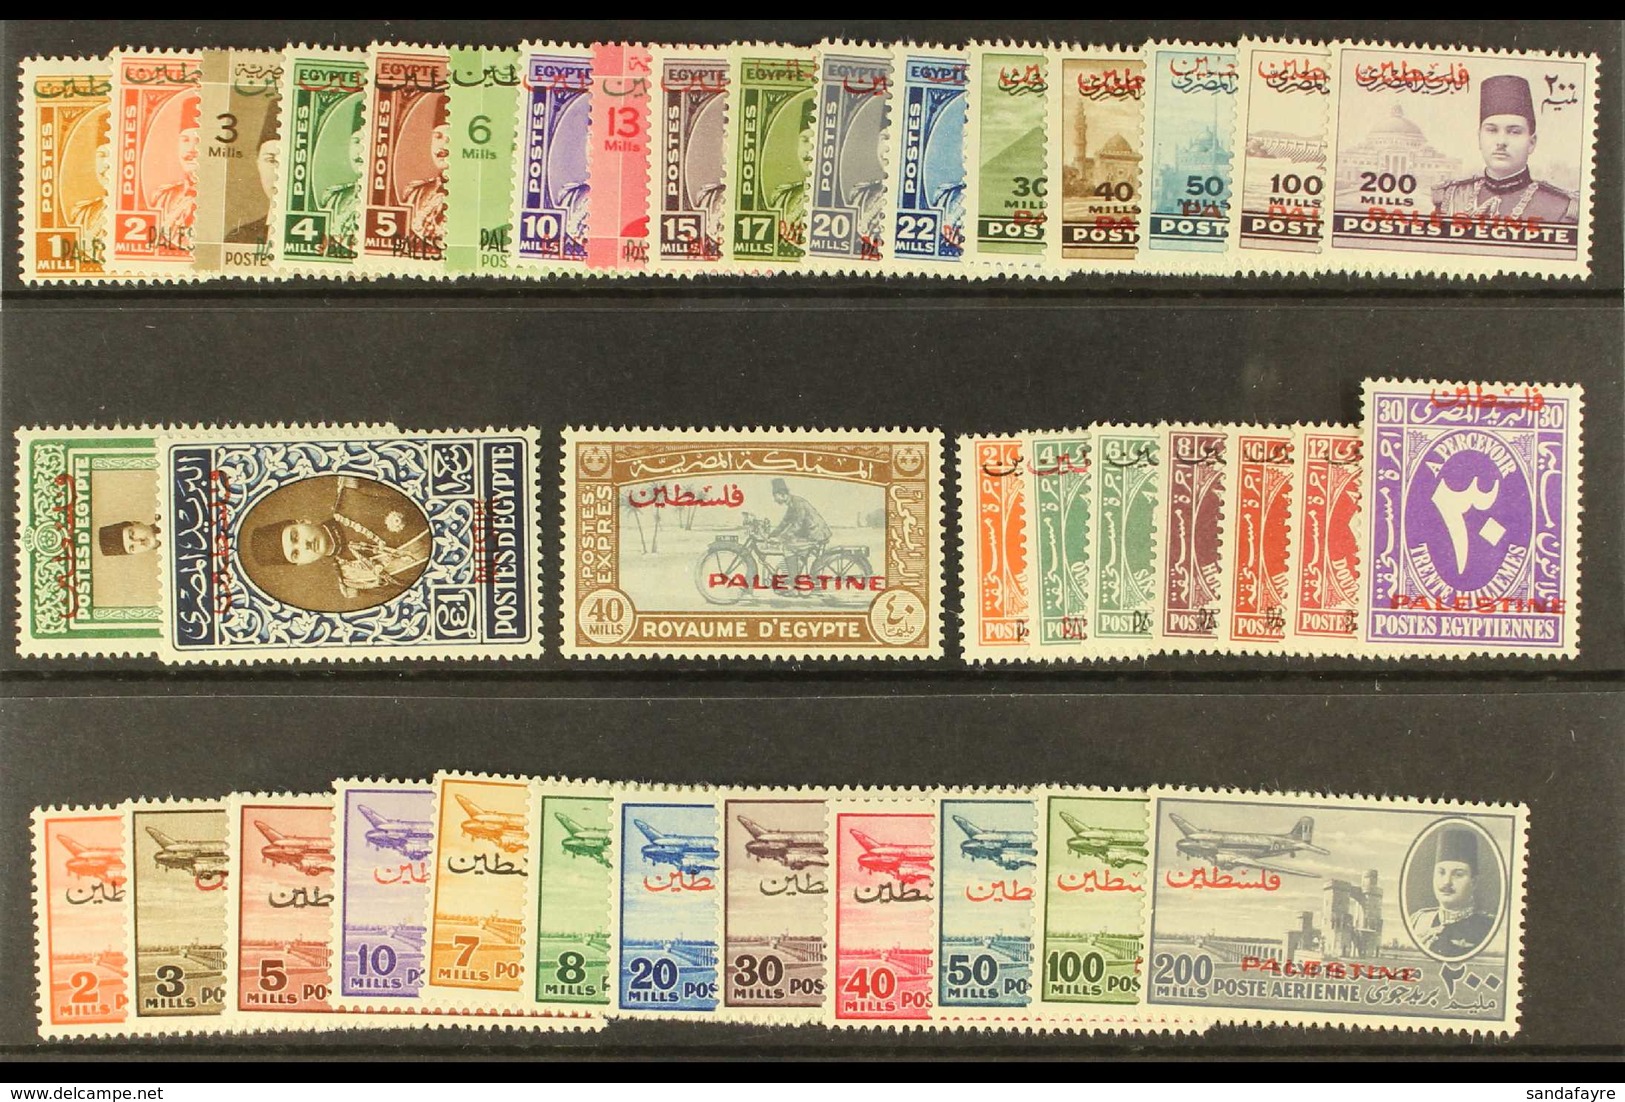 1948 EGYPTIAN OCCUPATION "PALESTINE" Overprints Postage, Air & Postage Dues Complete Sets, Plus 40m Express Stamp, SG 1/ - Palestina